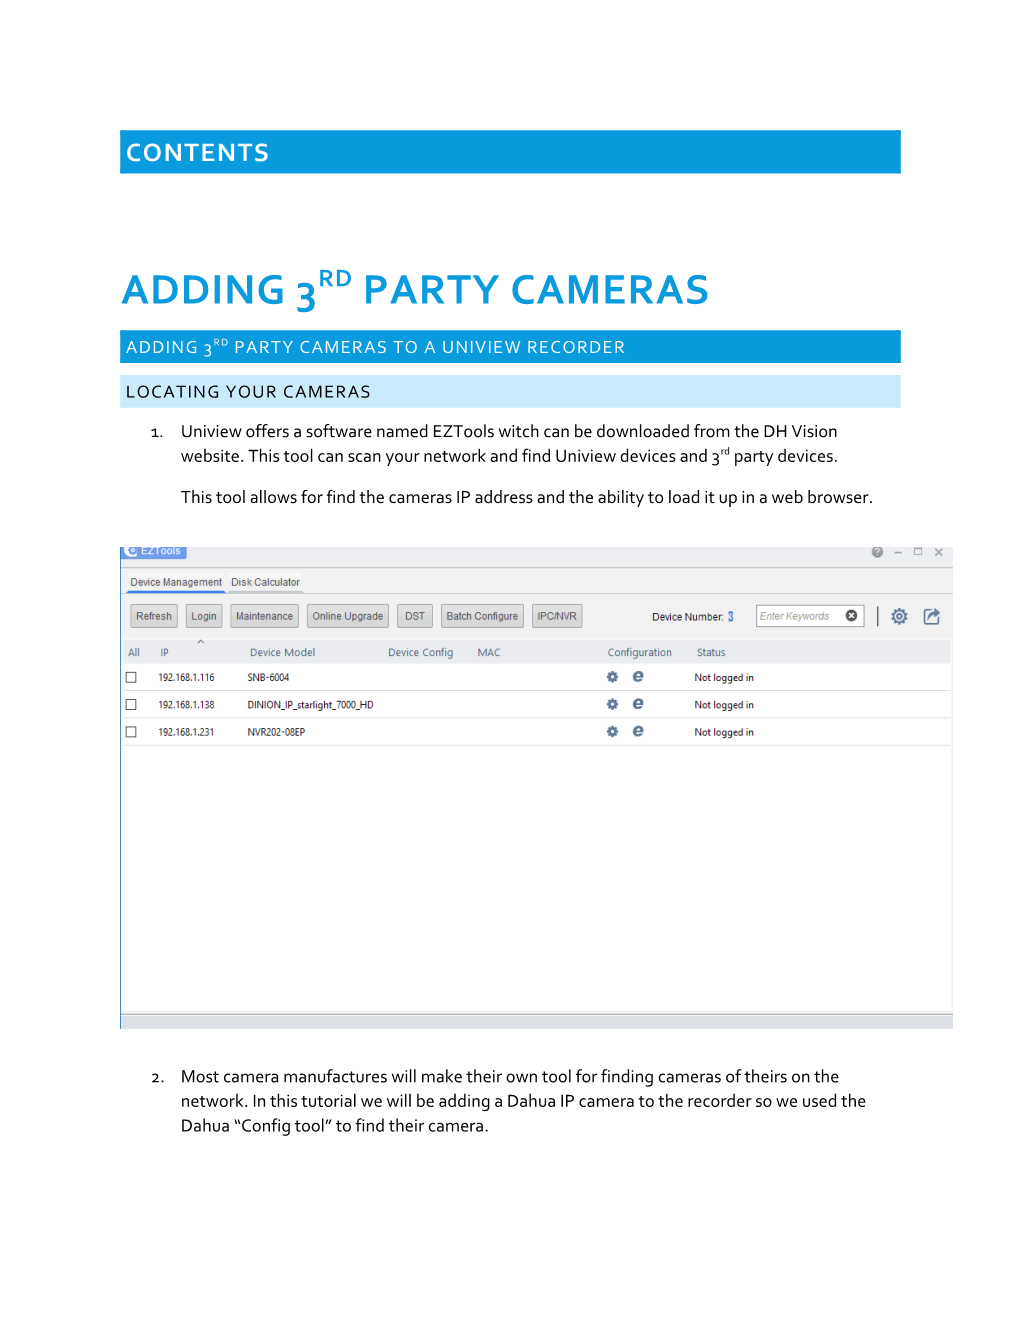 Adding 3Rd Party Cameras to a Uniview Recorder